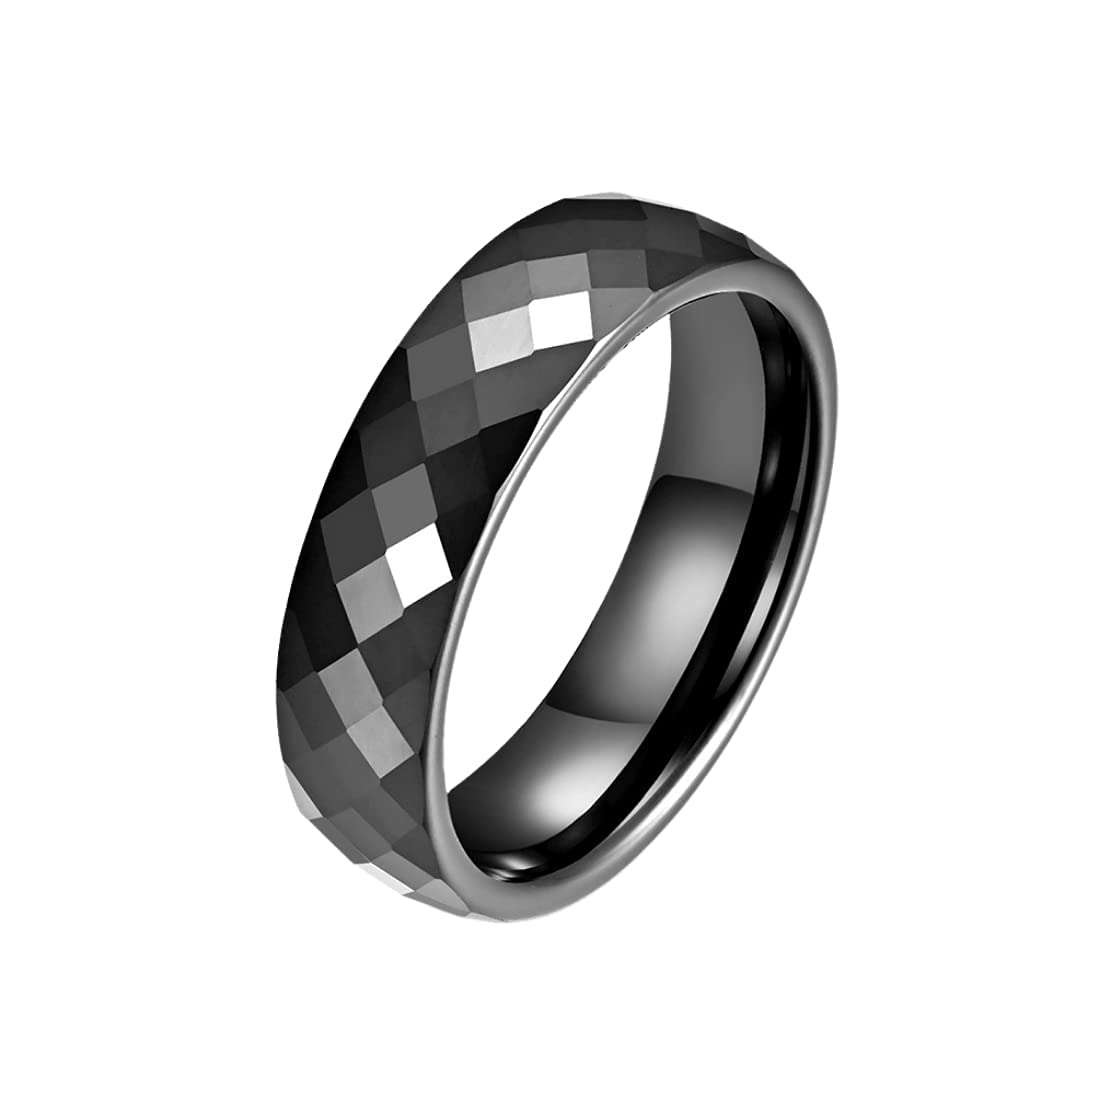 Yellow Chimes Rings for Men Black Band Ring Stainless Steel Ceramic Top Design Band Ring for Men and Boys.